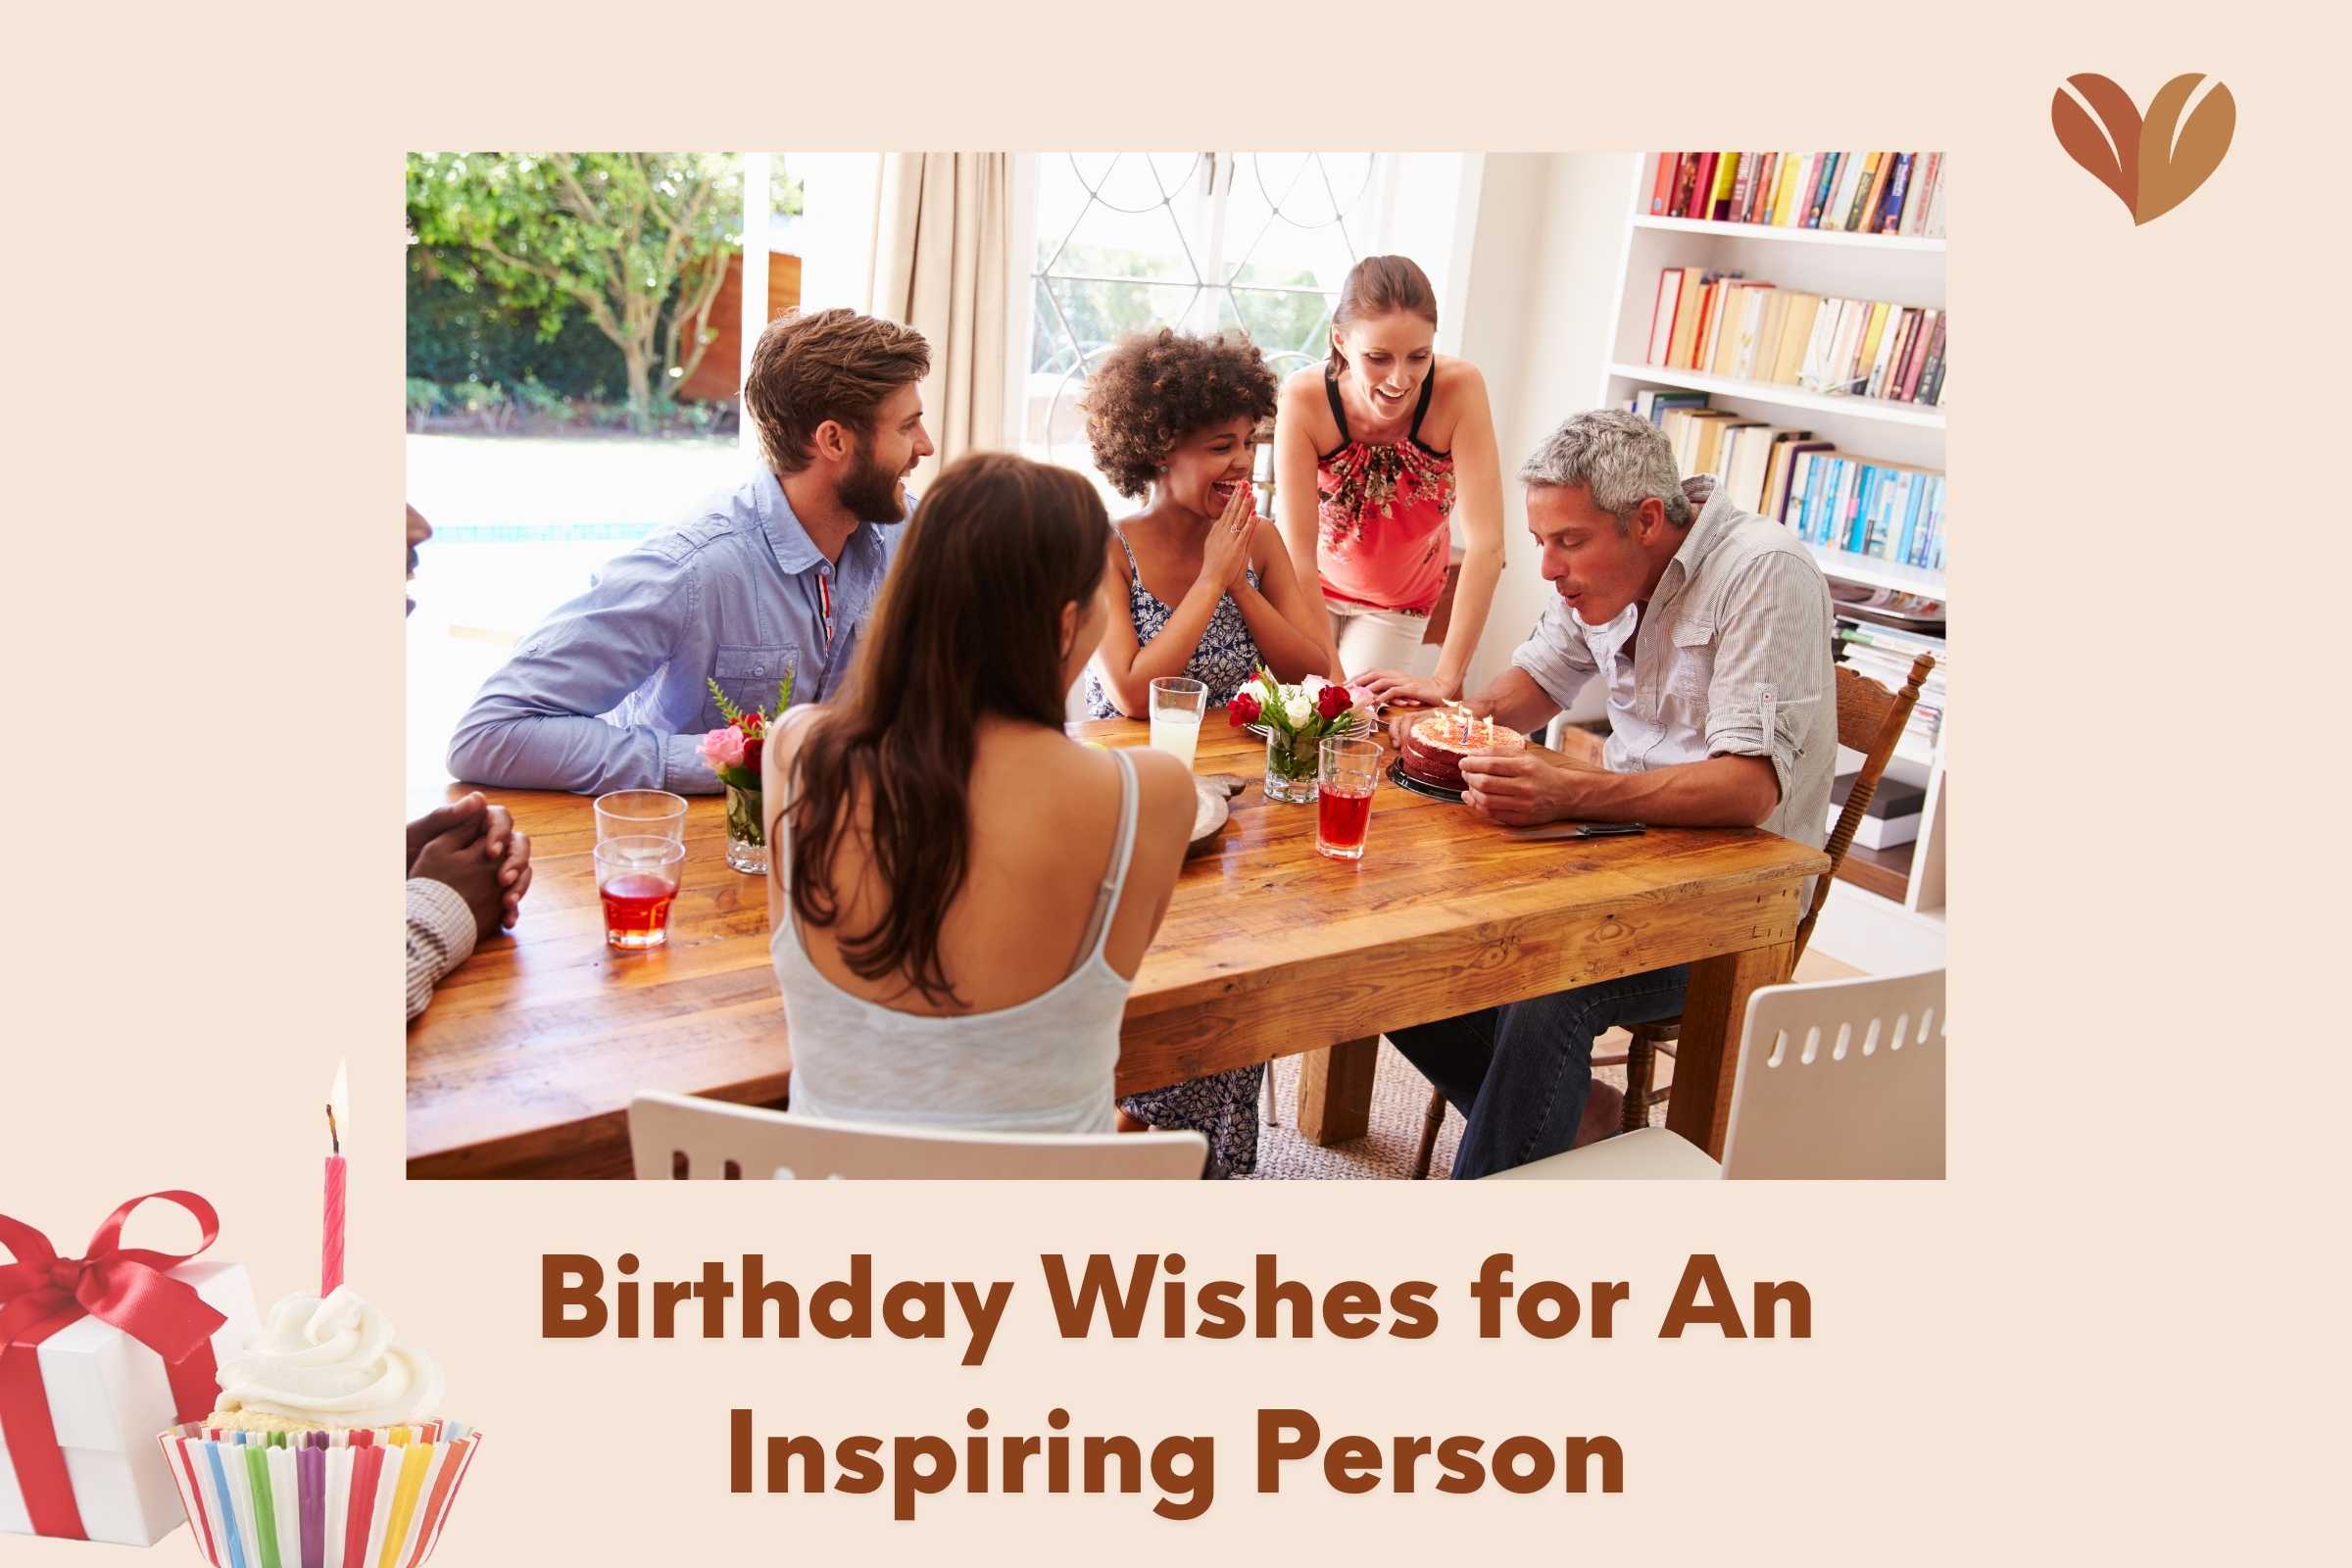 80 uplifting birthday messages for a friend, filled with inspiring words and love.